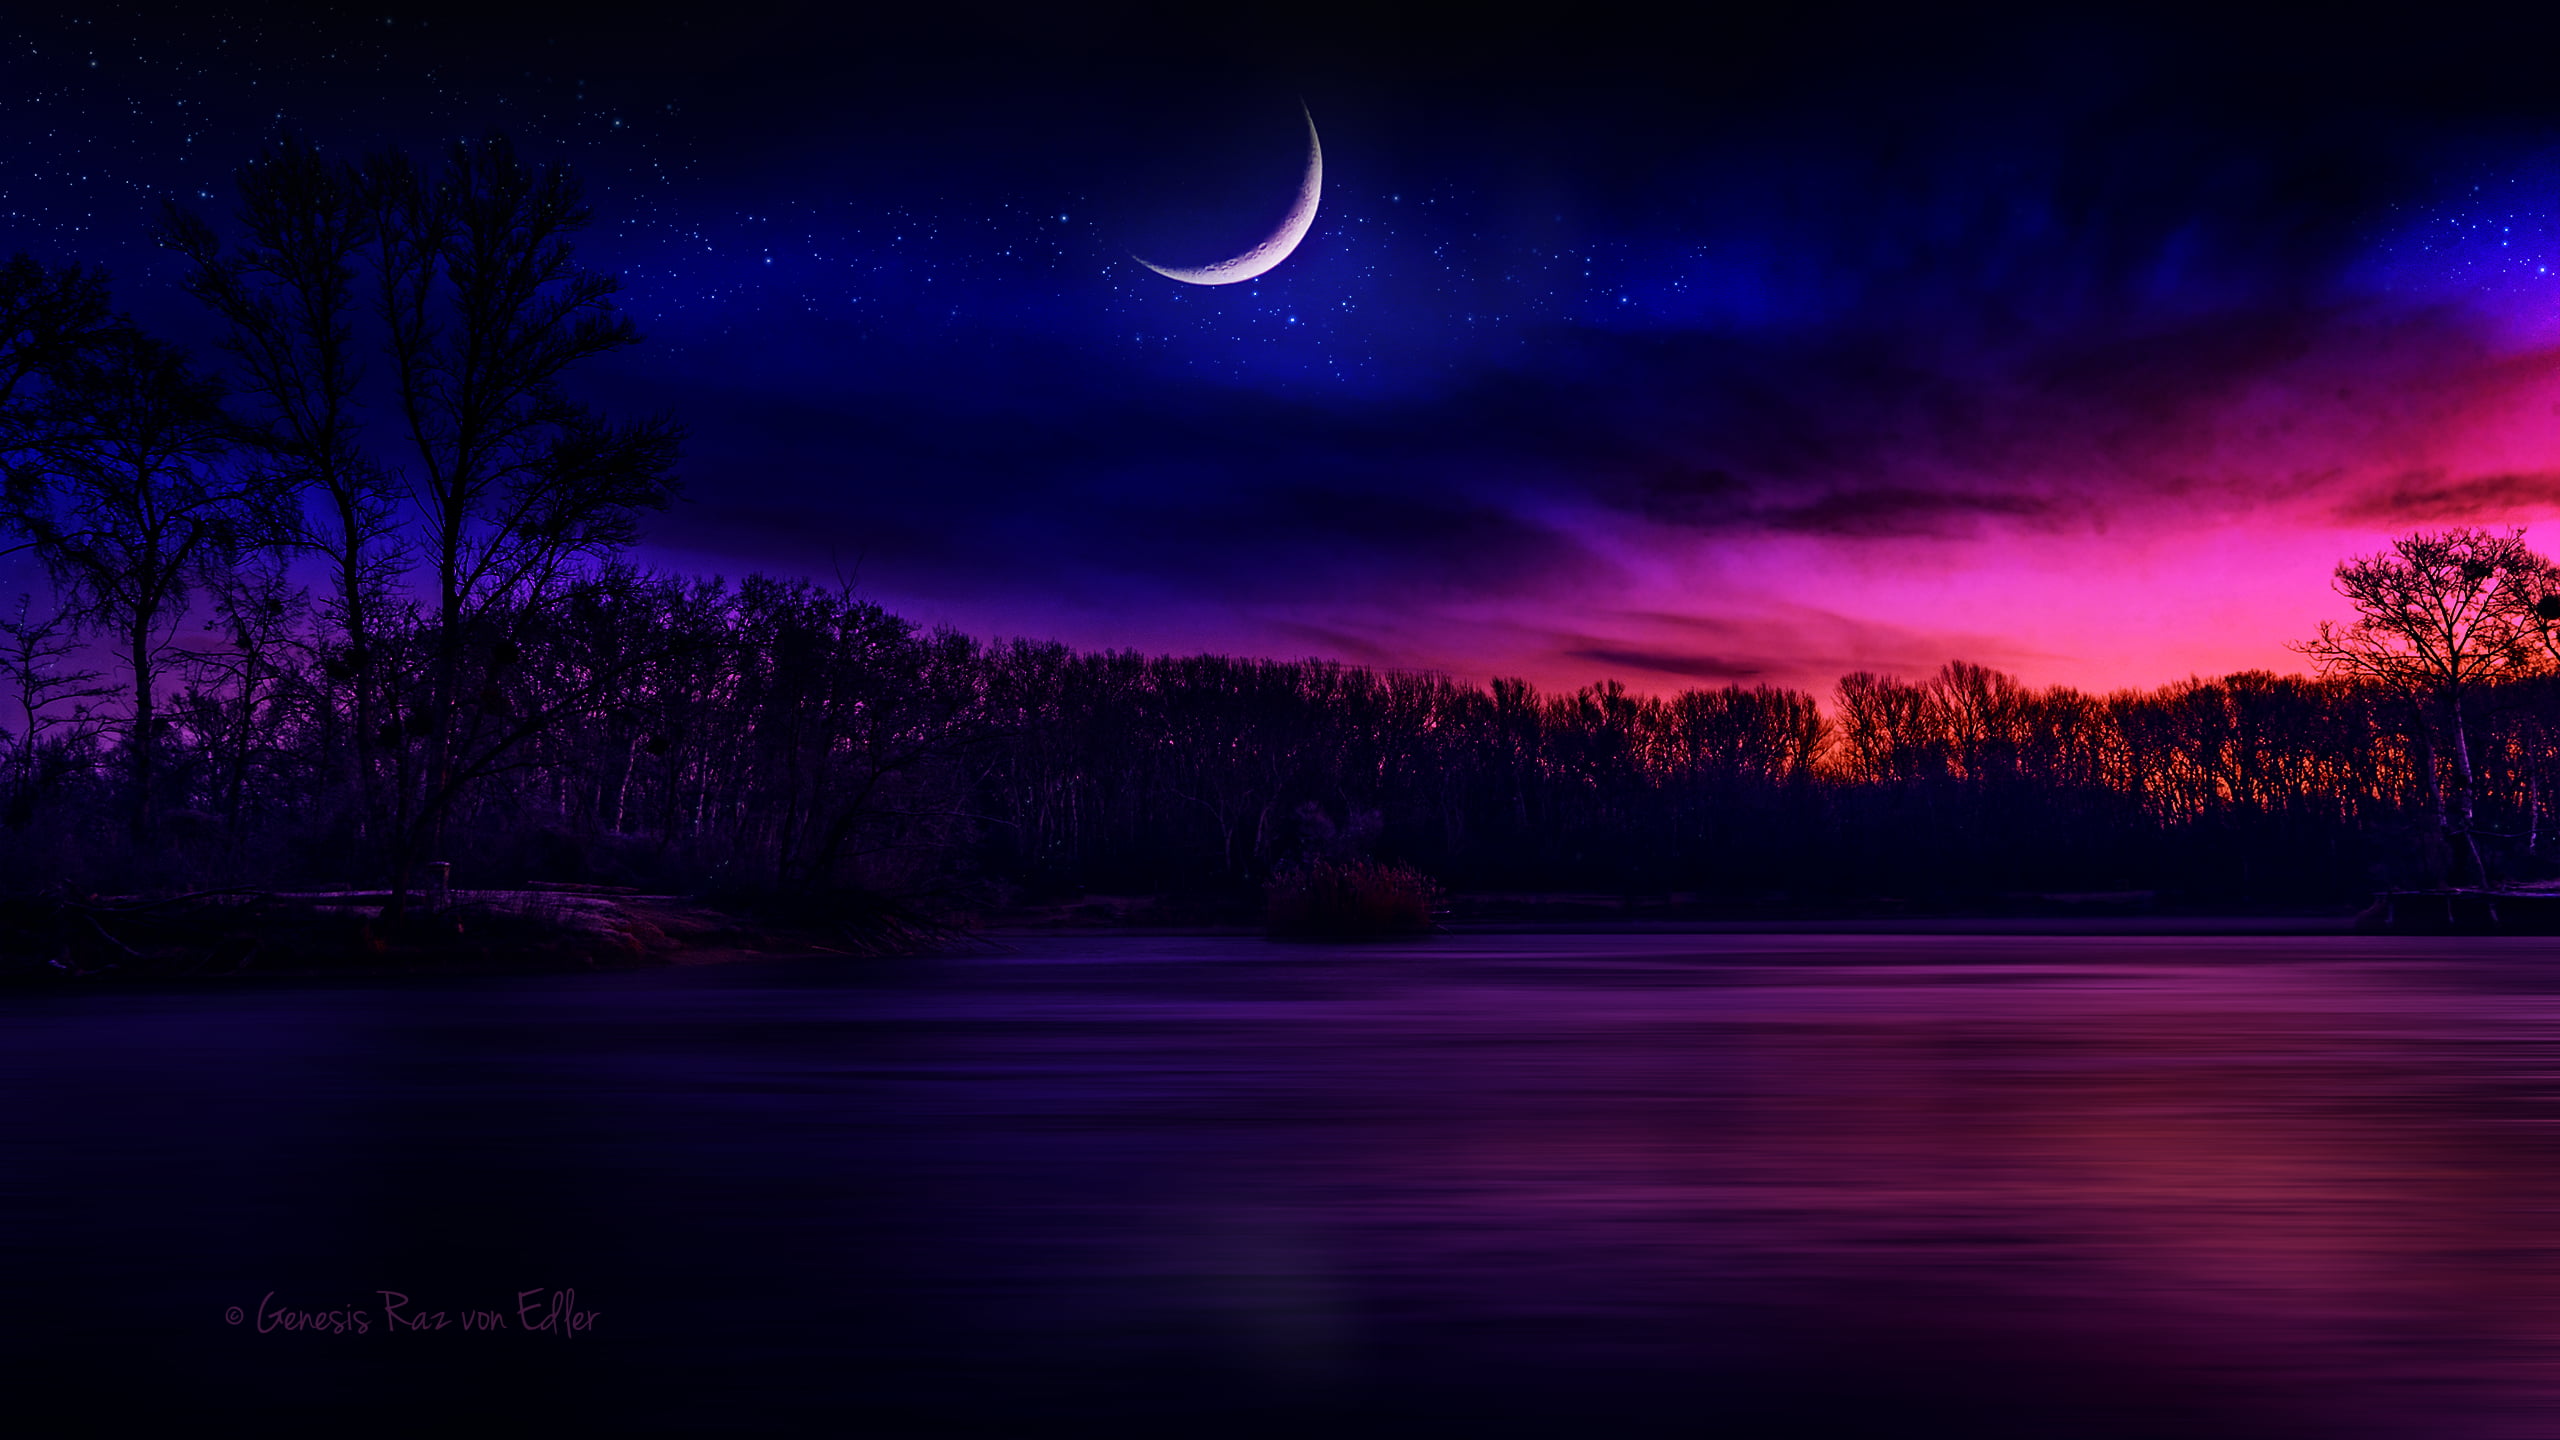 1440x900 resolution | body of water near tree under crescent moon